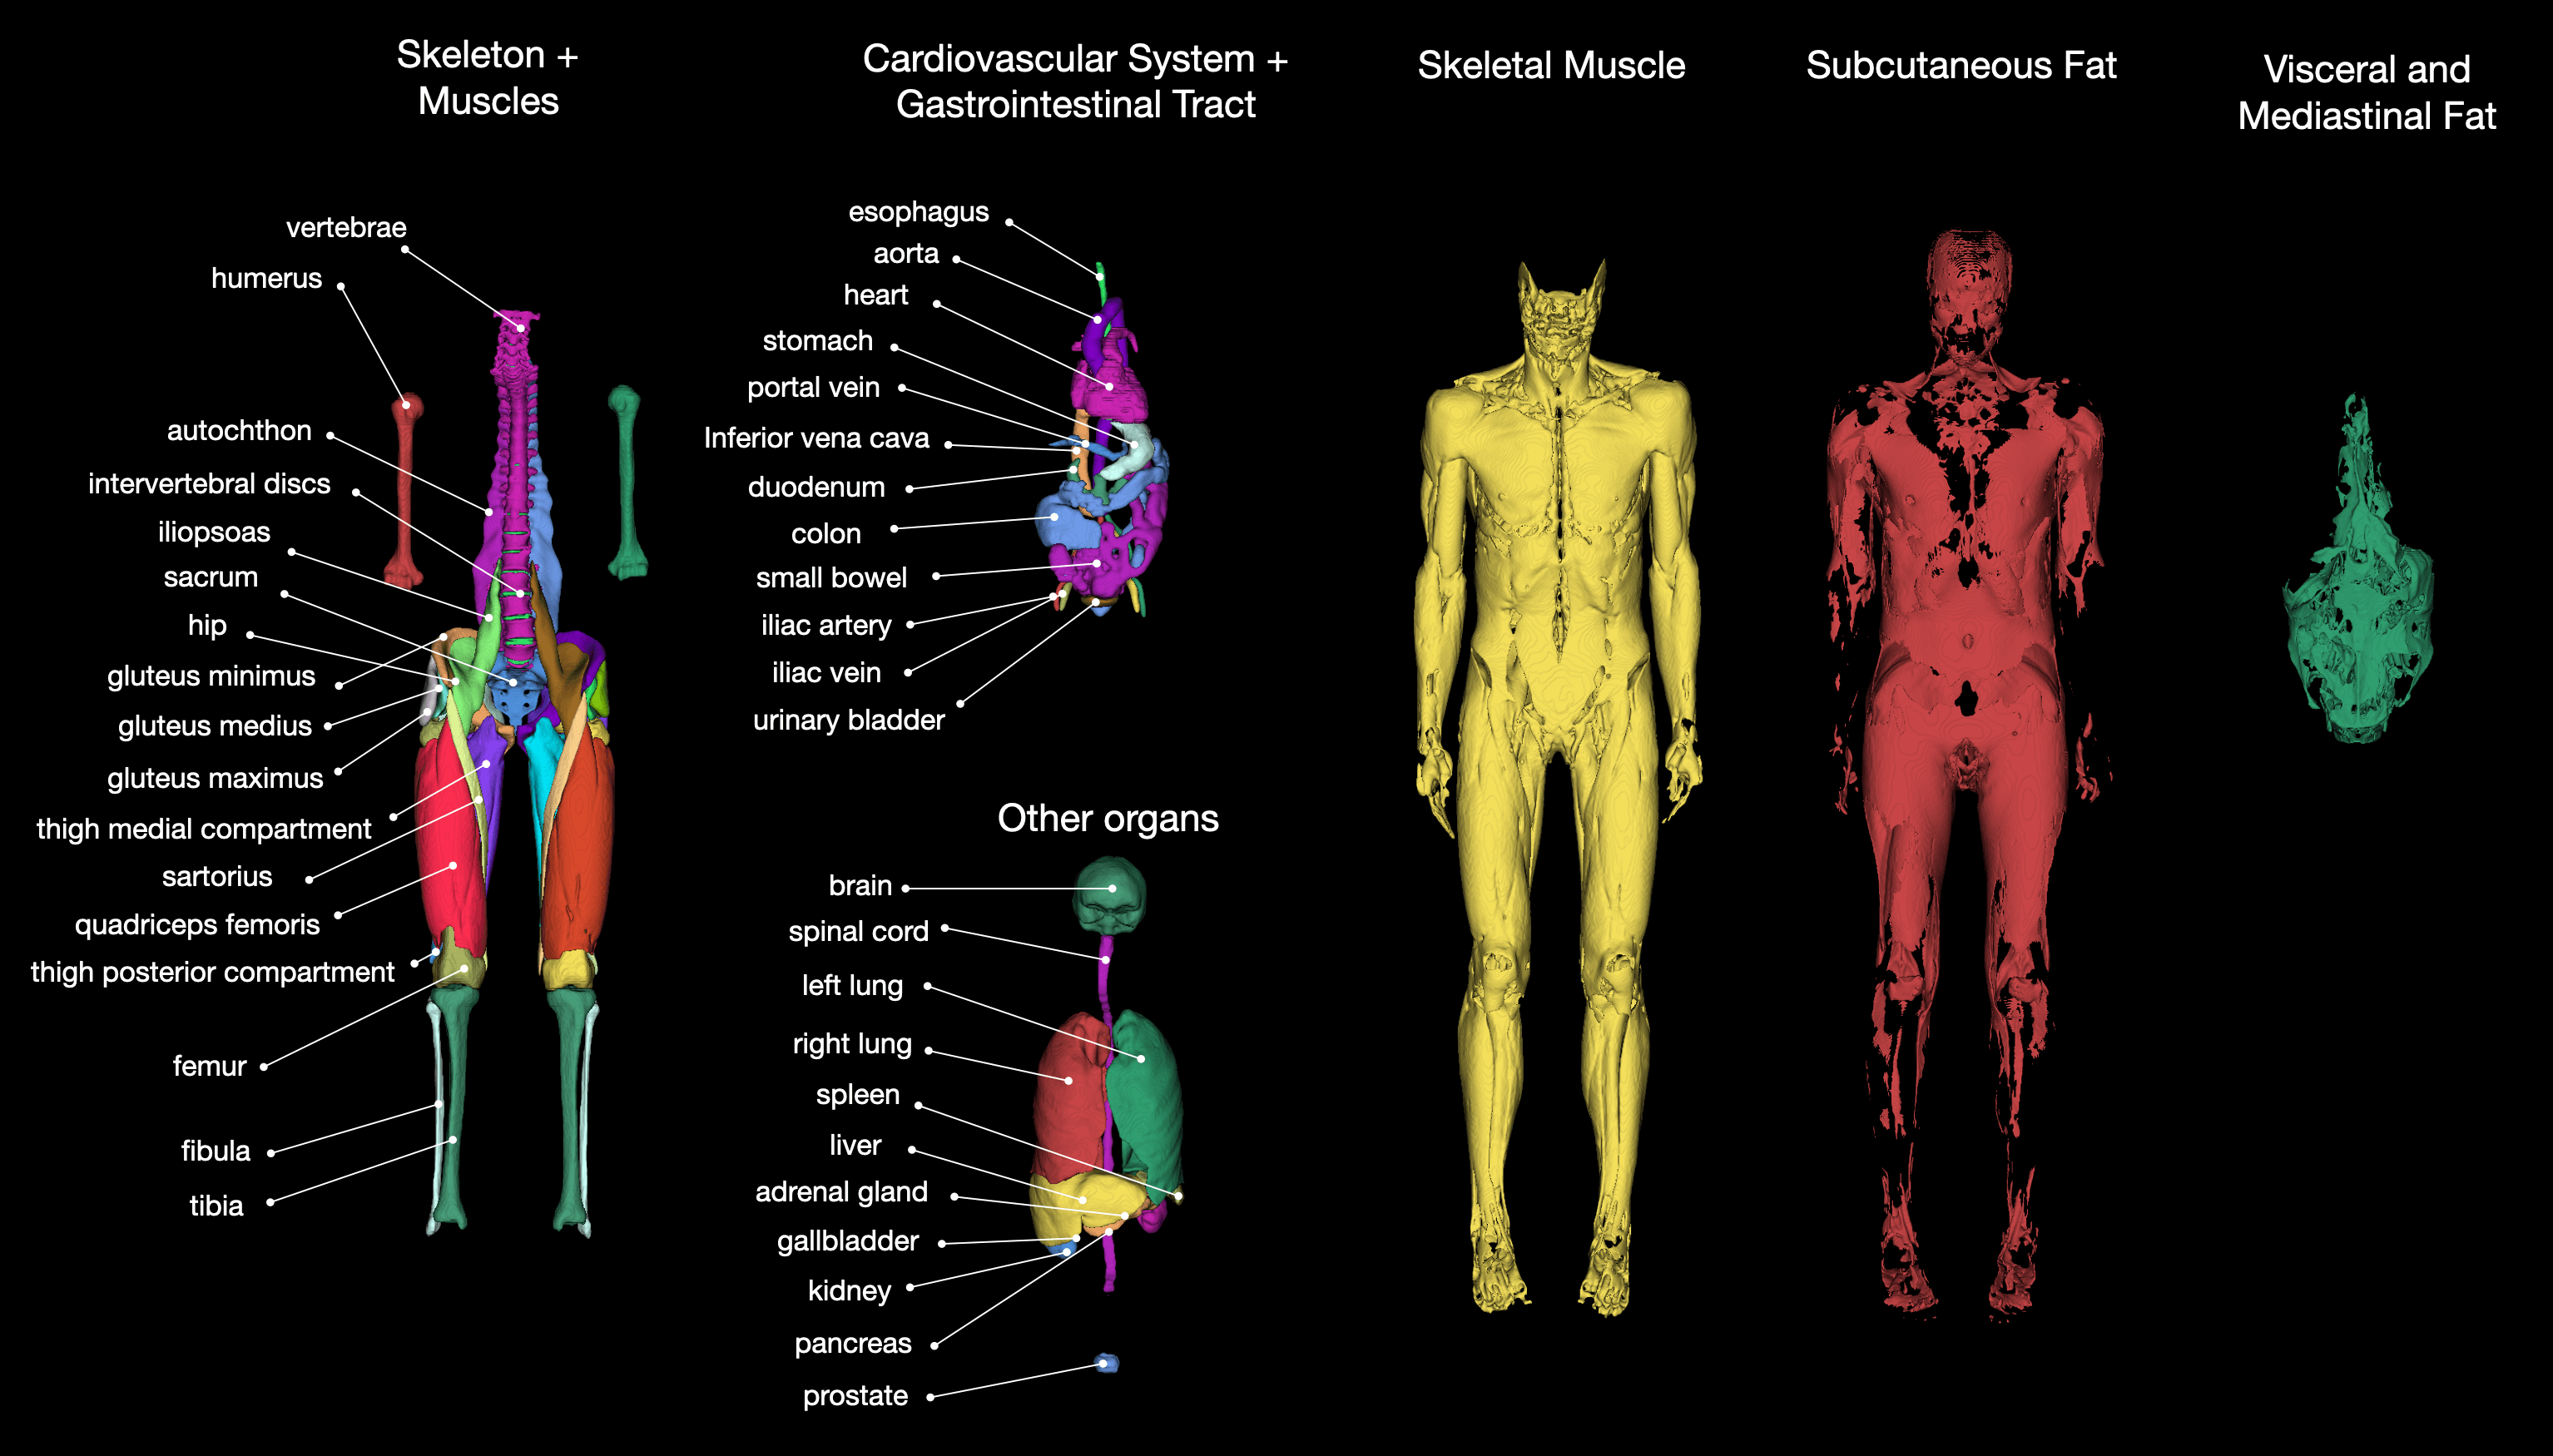 overview_classes_mr.png